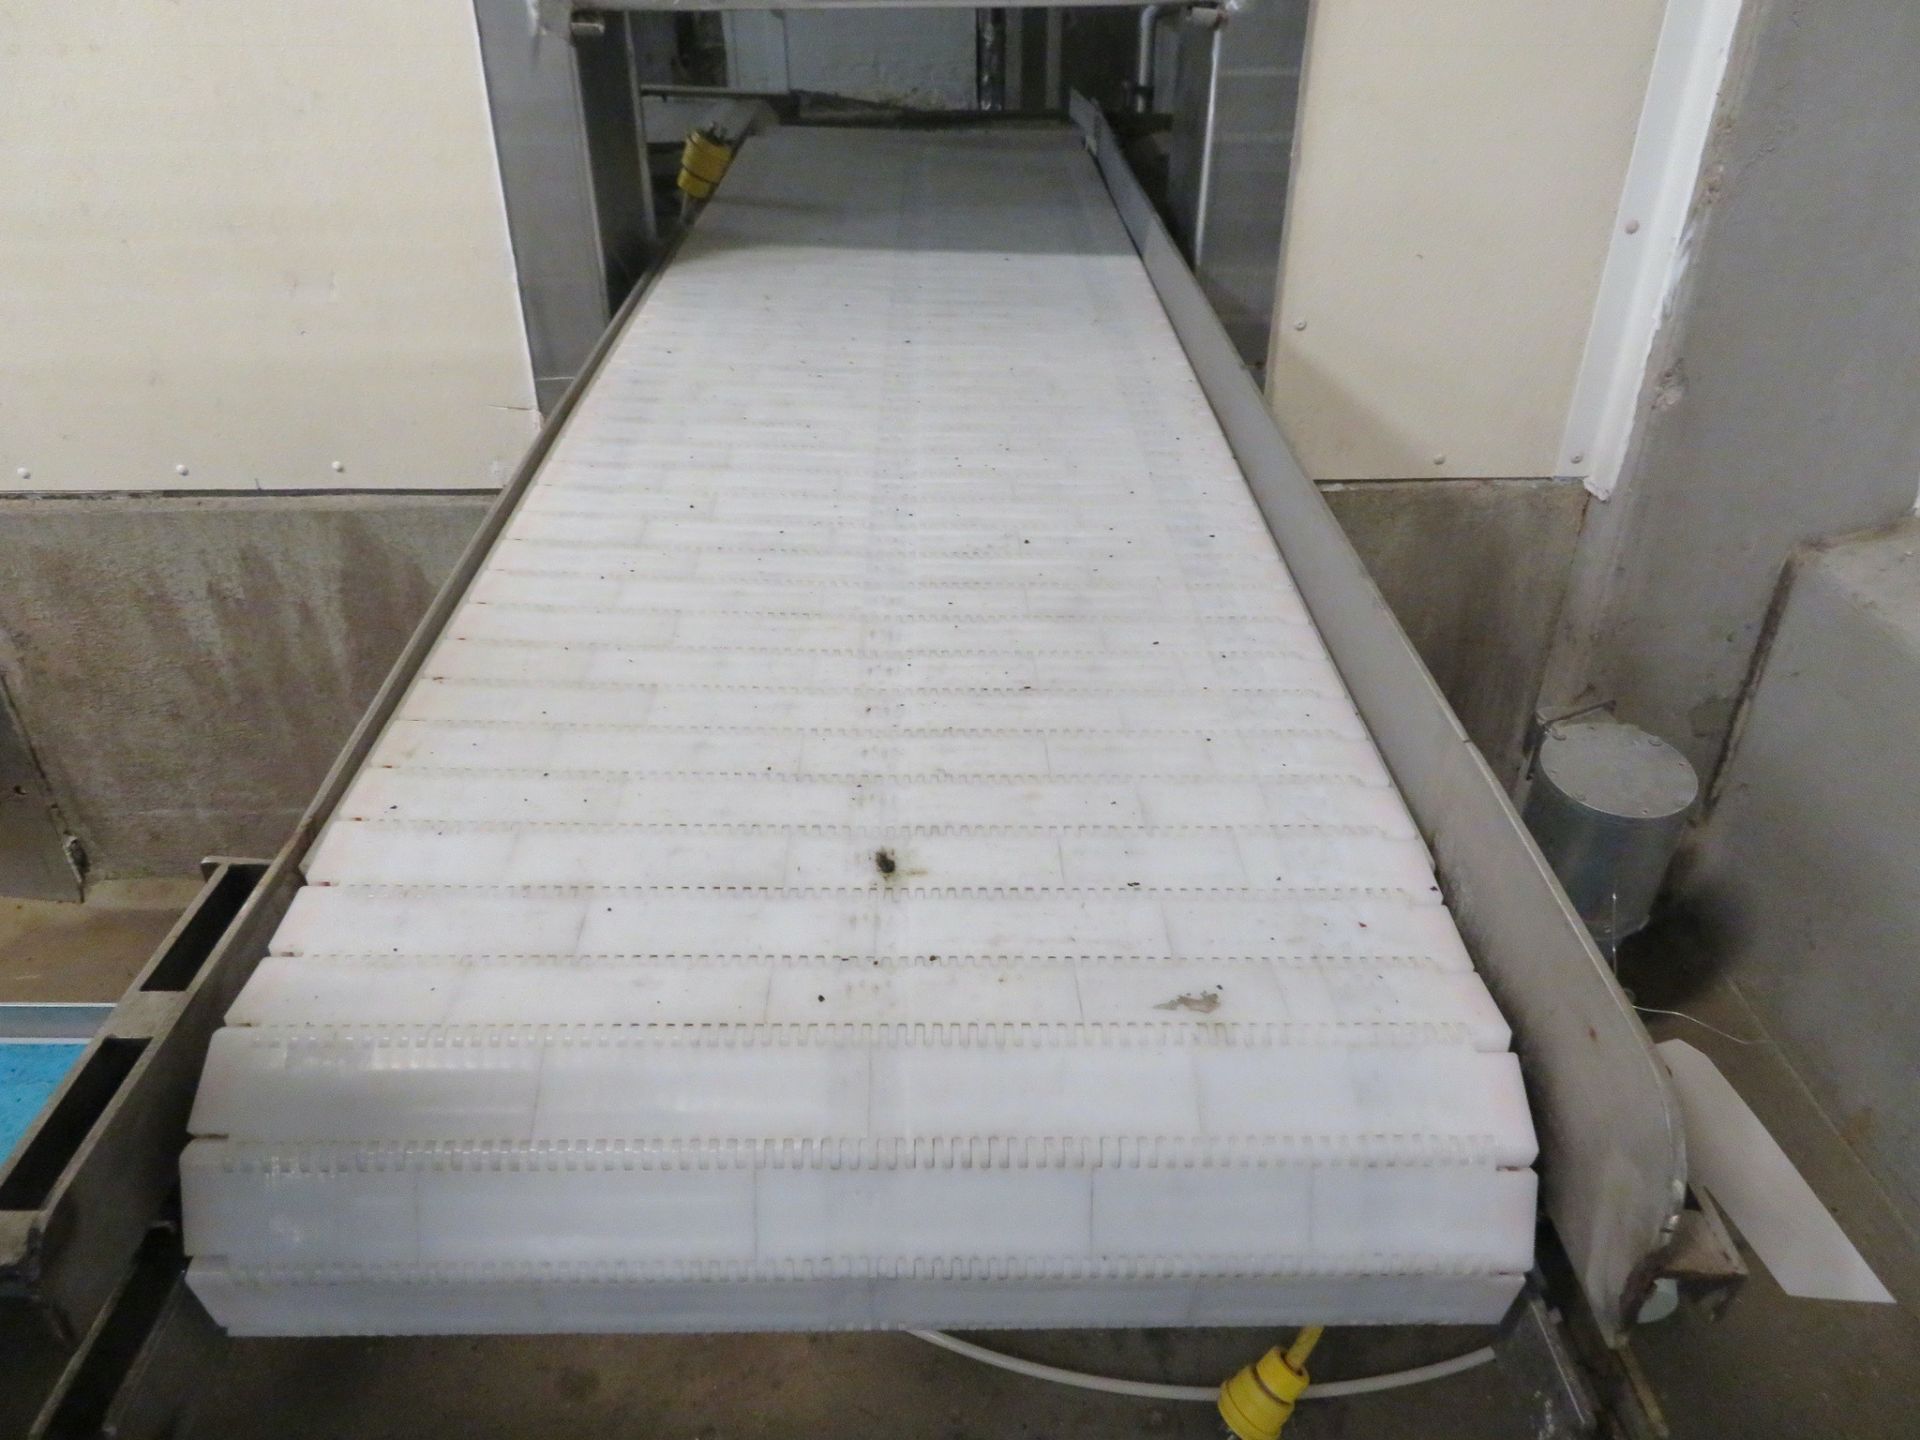 Stainless Steel Conveyor, 24"W x 96"L | Rigging Fee: $200